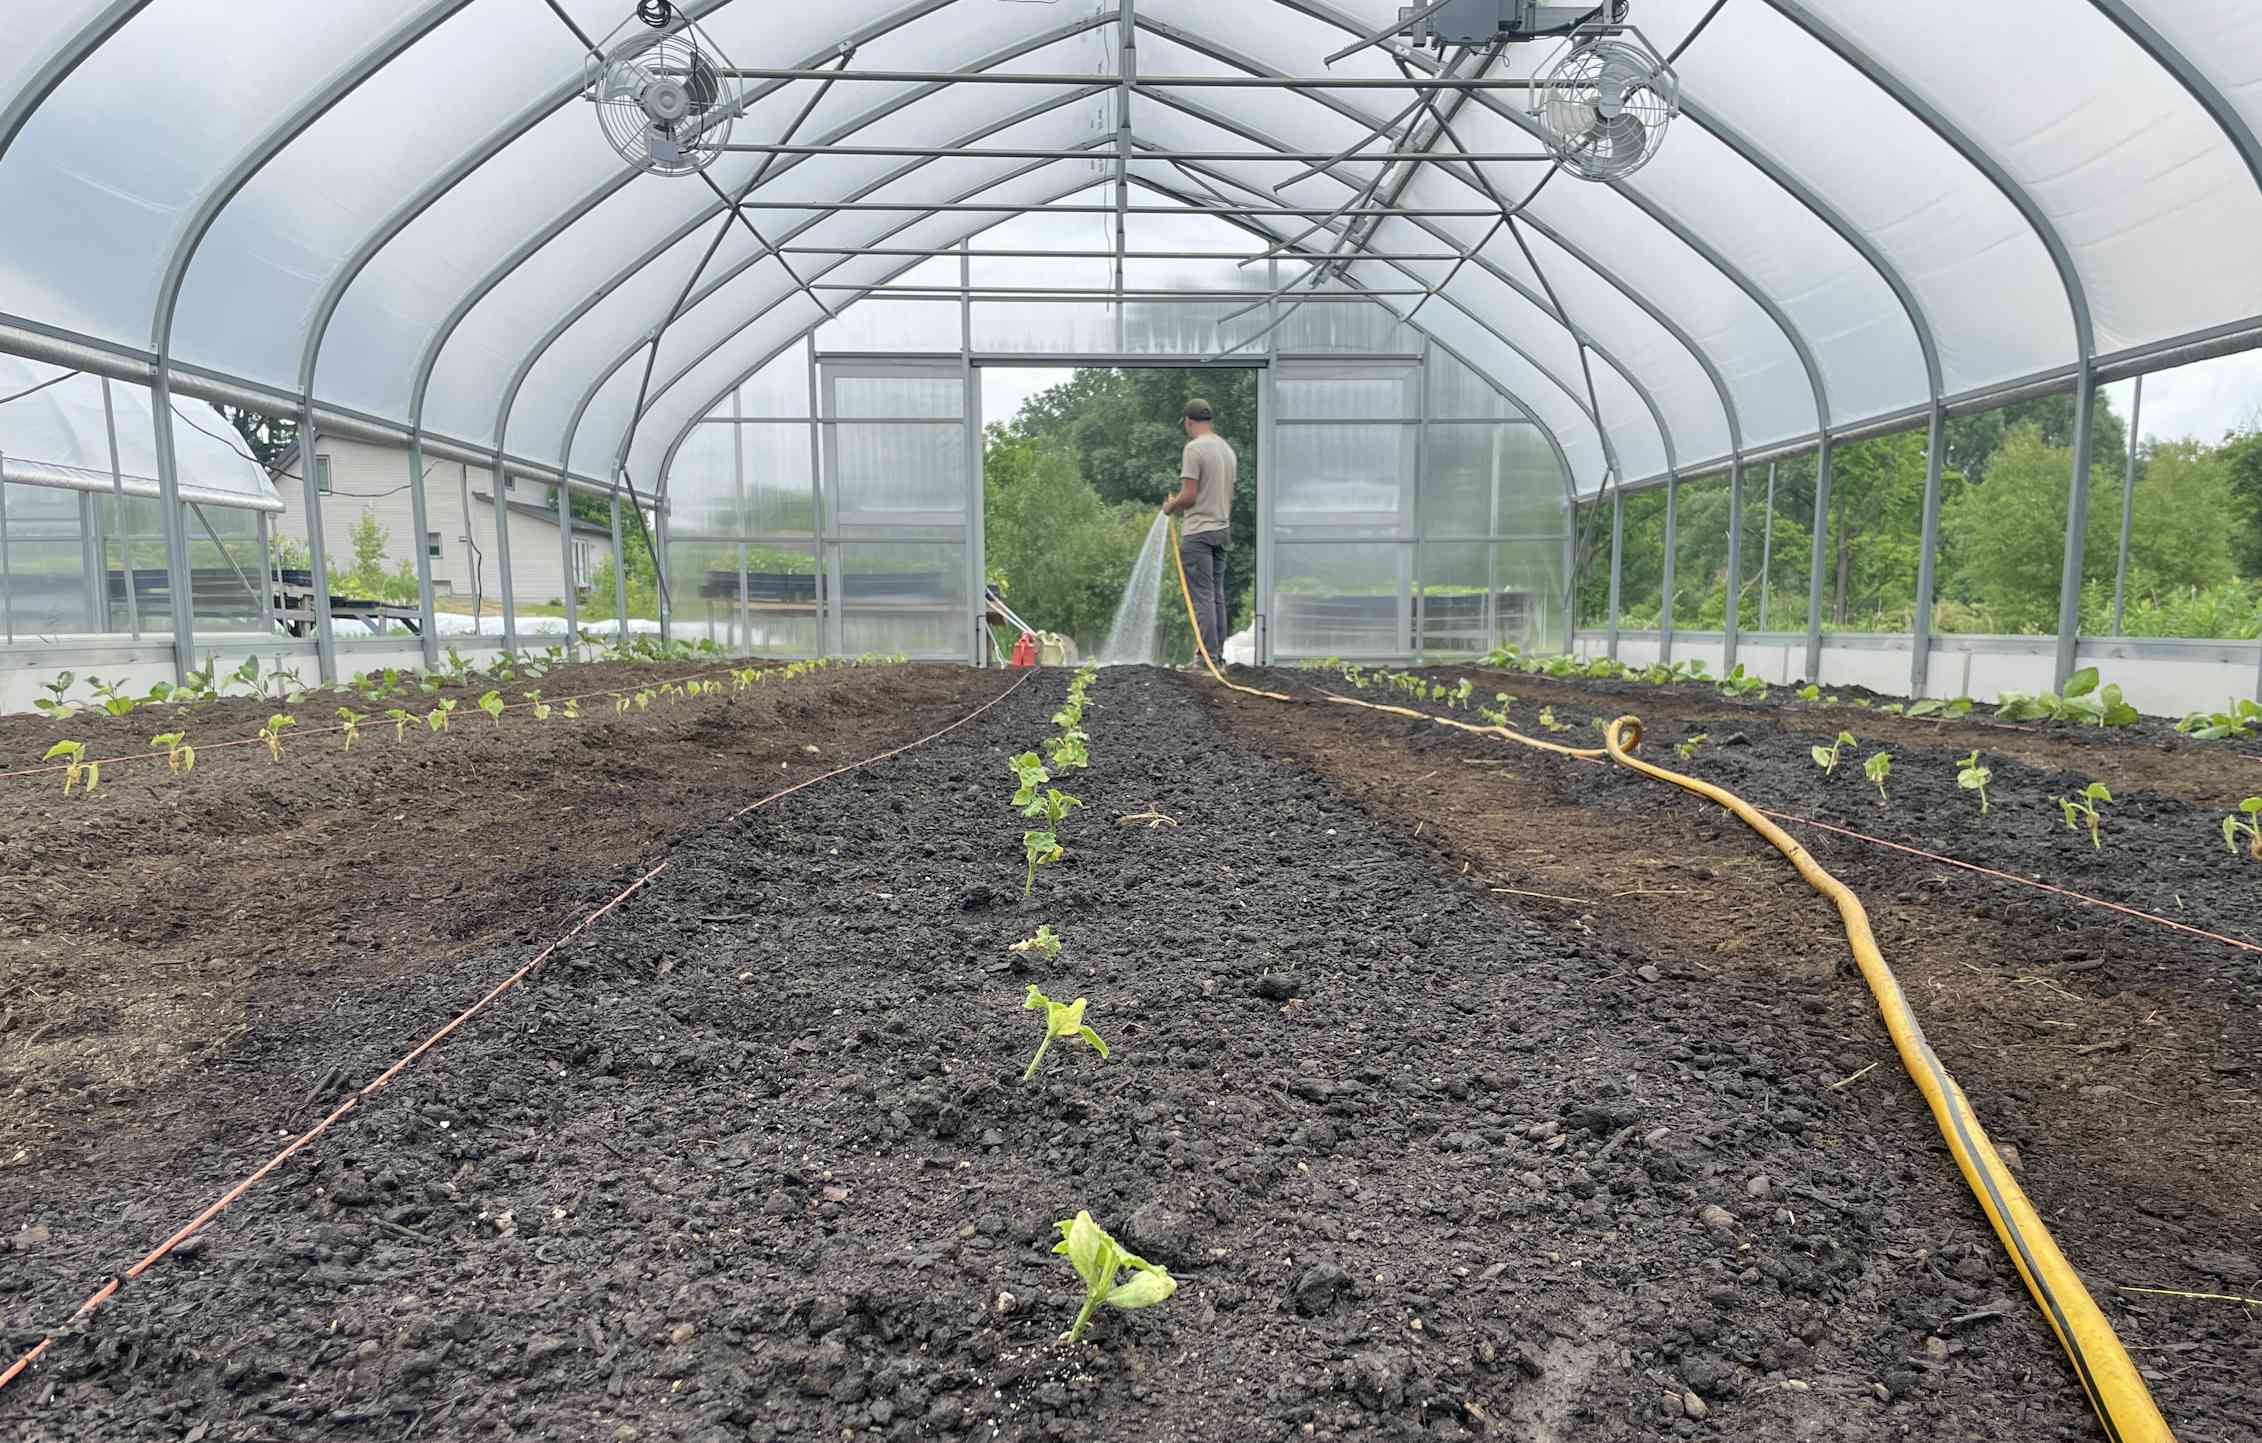 A person watering seedlings in a large greenhouse